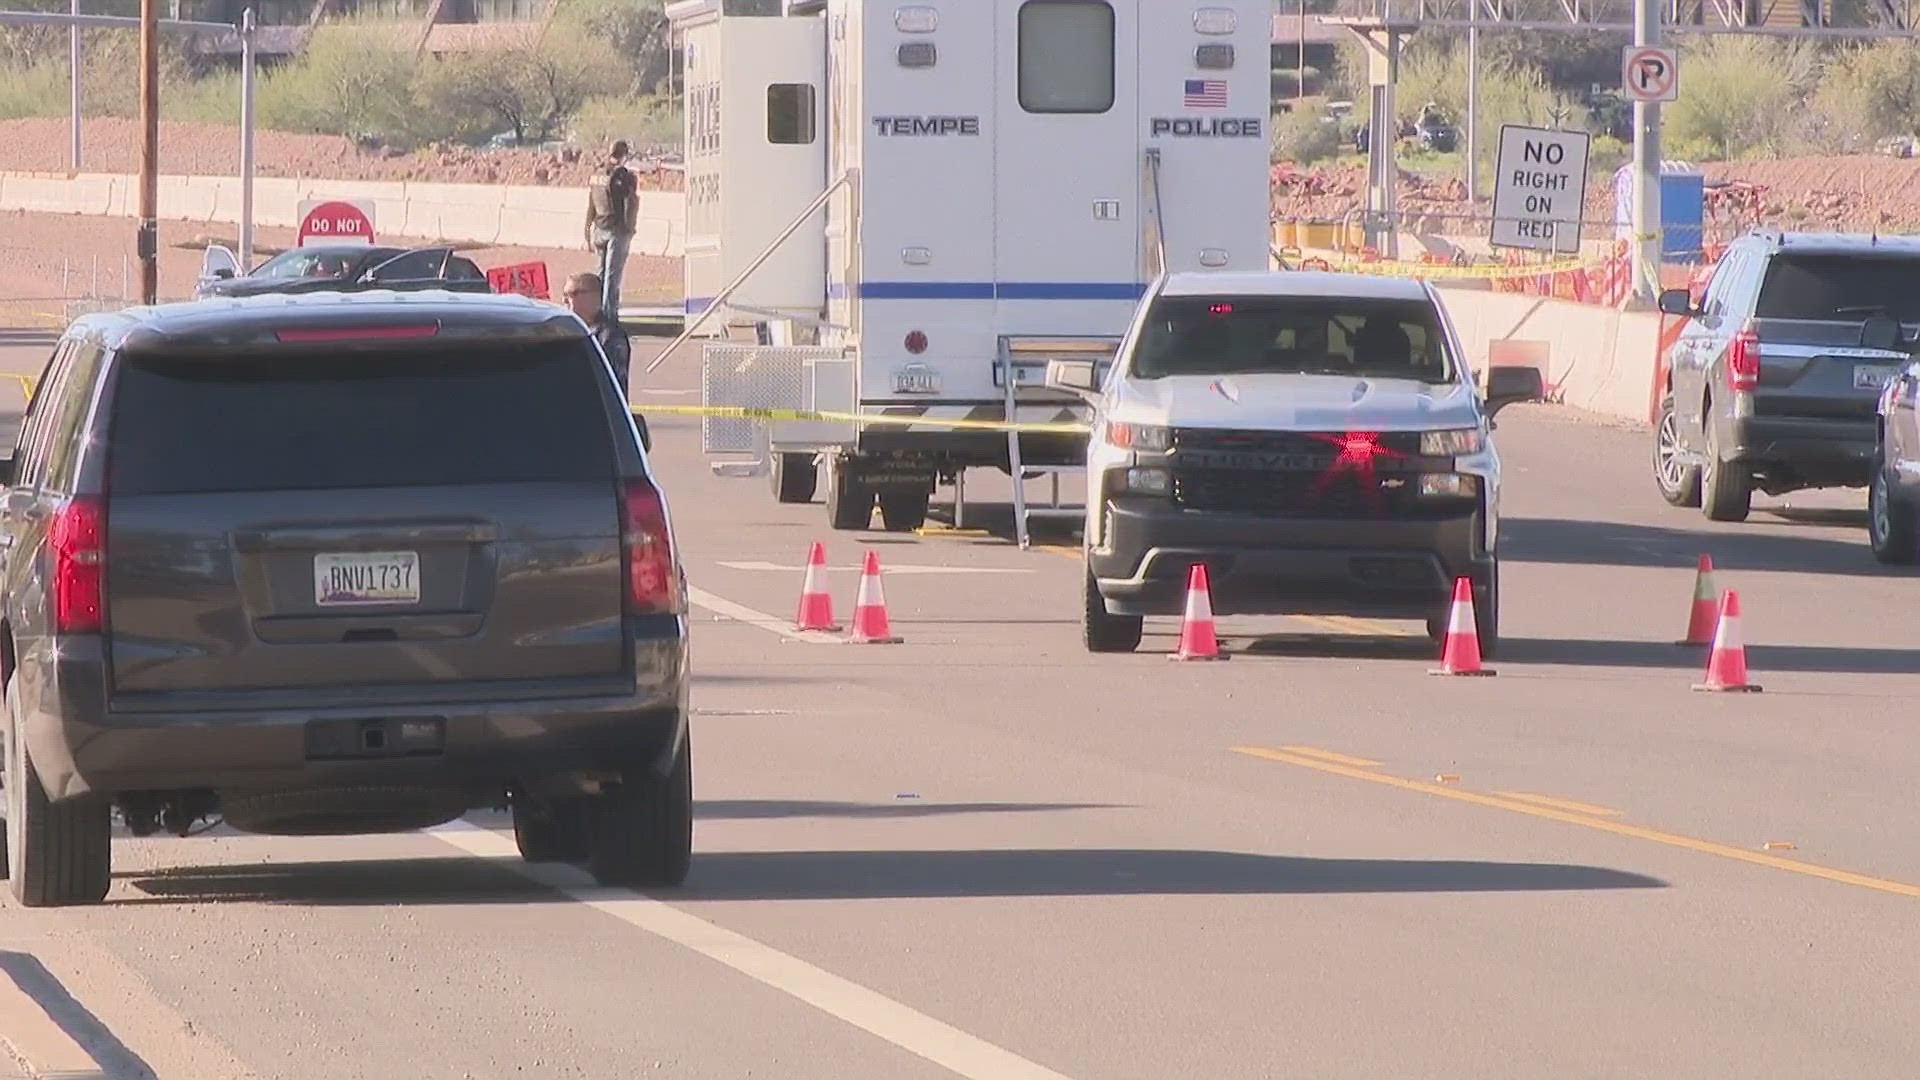 Tempe police said that the suspect vehicle pulled up to and shot at another car carrying 1 adult and 6 juveniles.